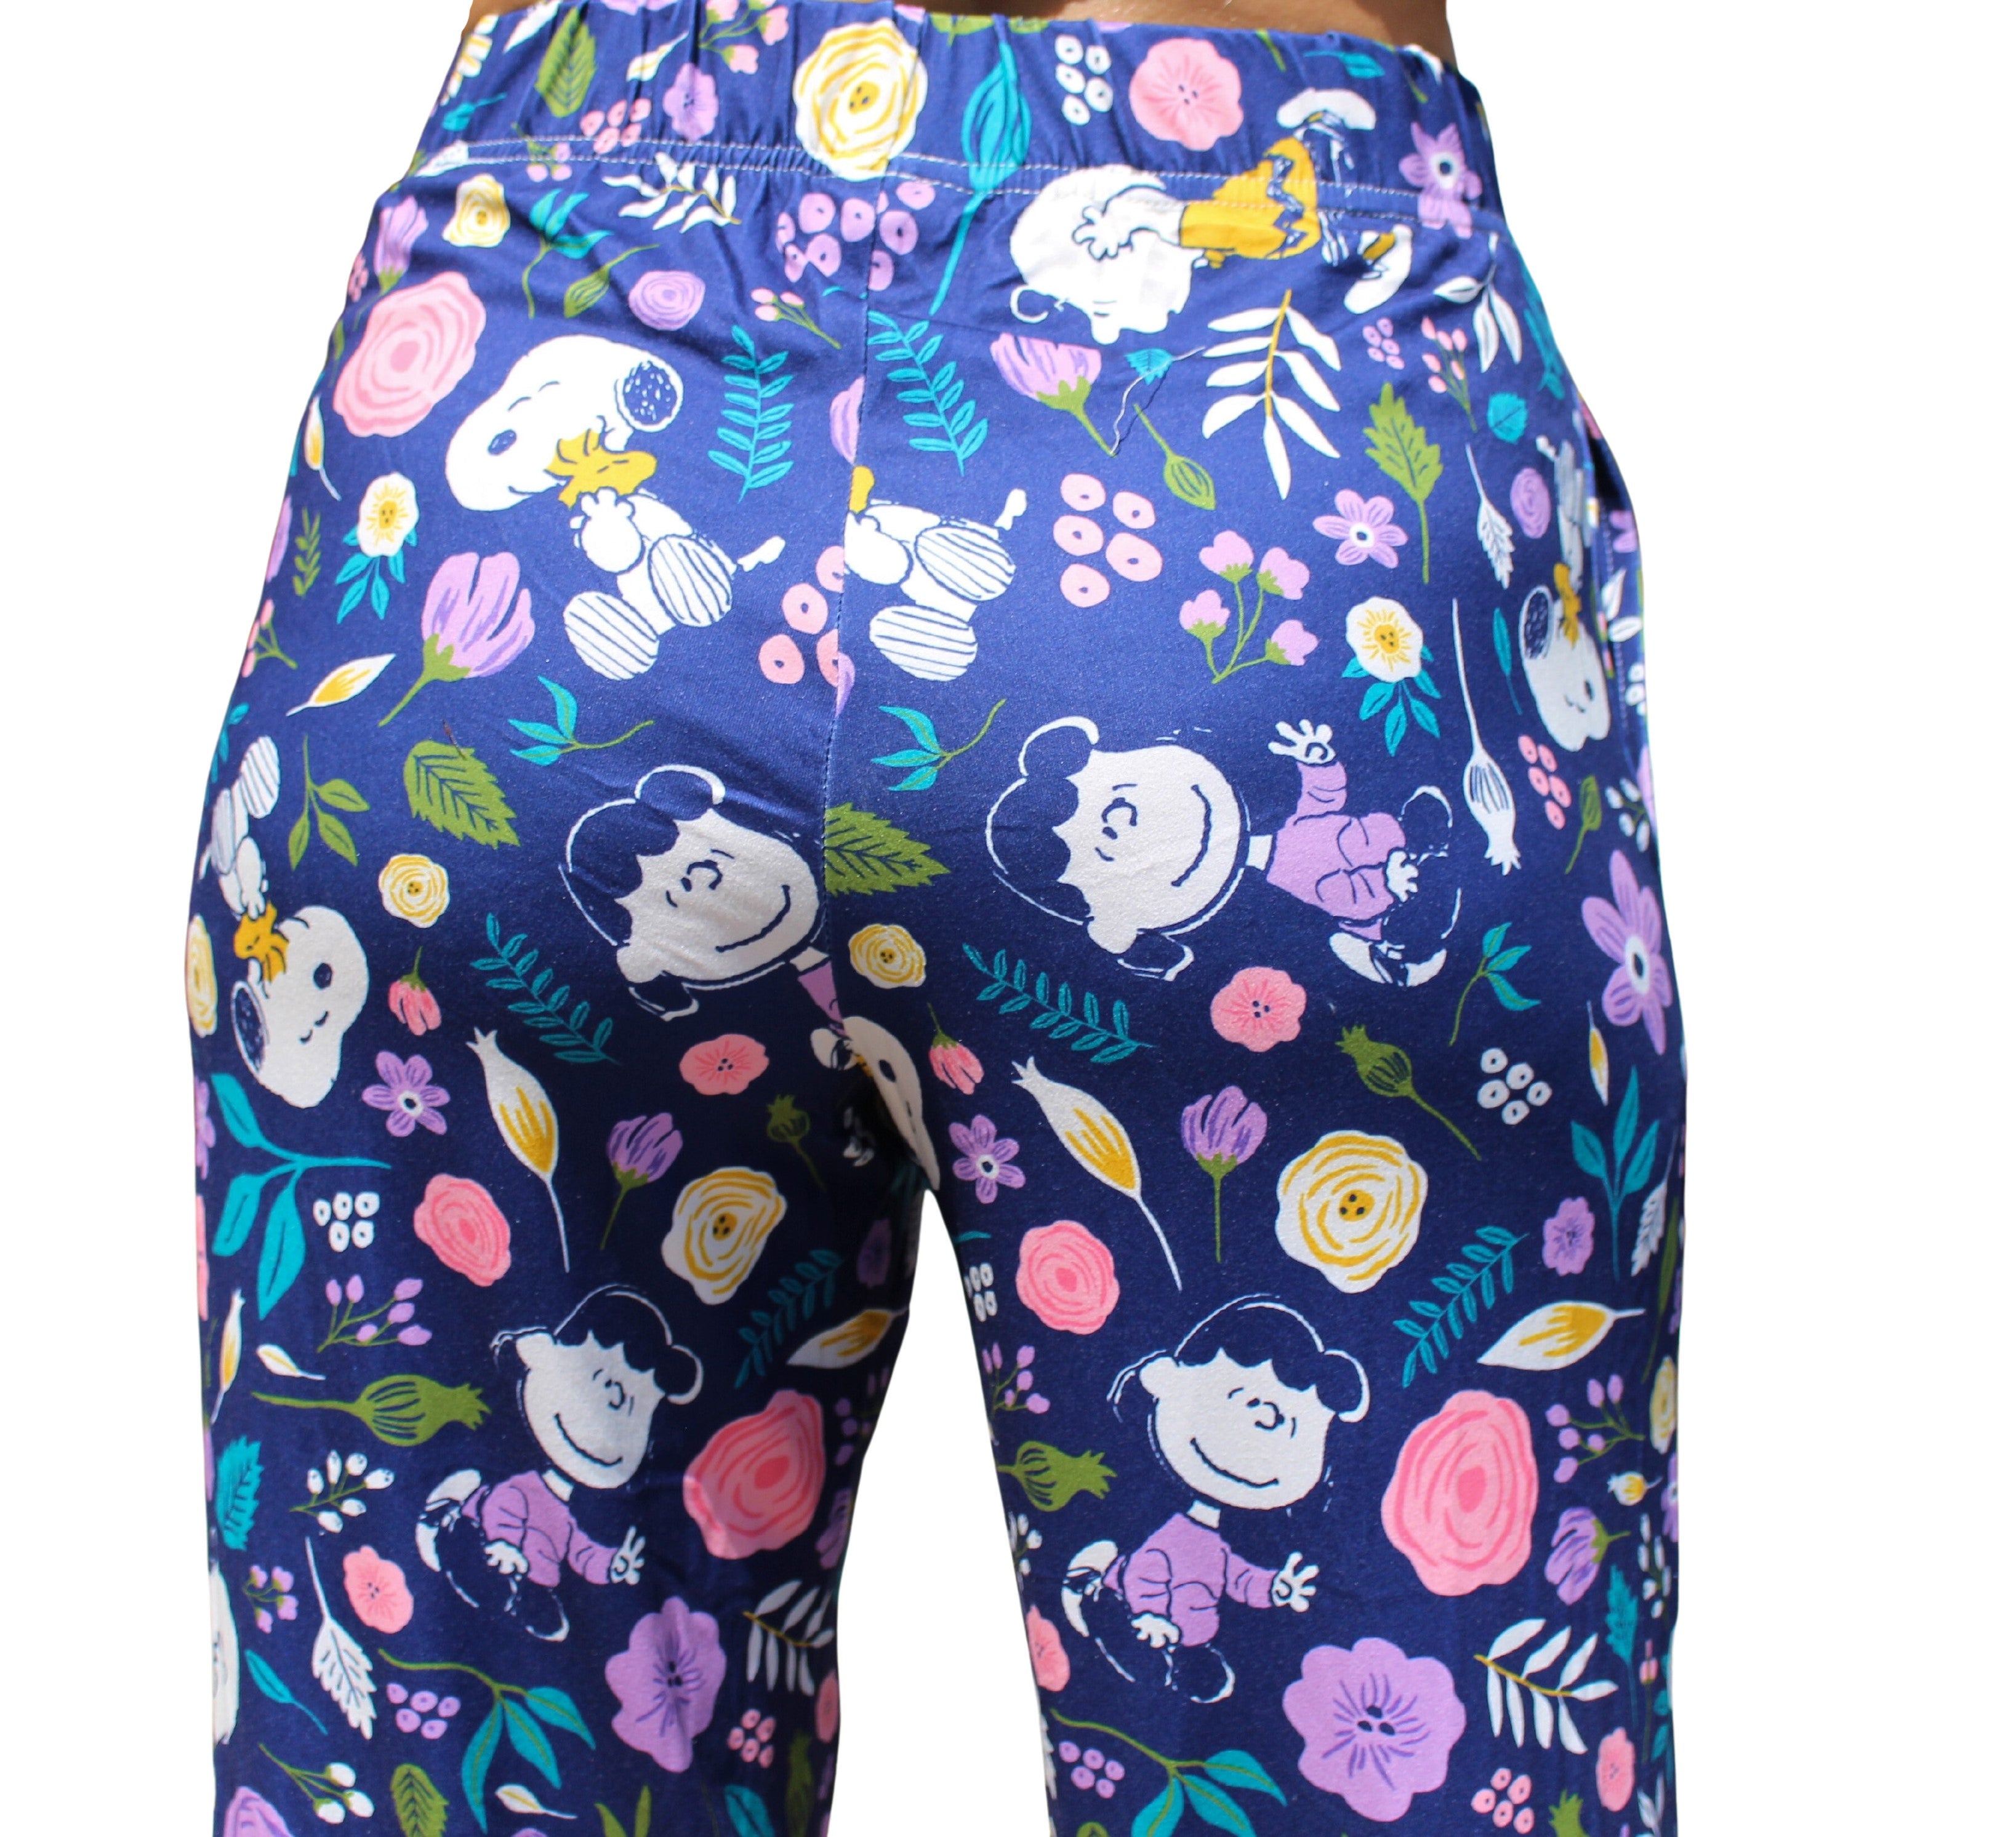 Snoopy Floral Love pajama lounge pants on model back view